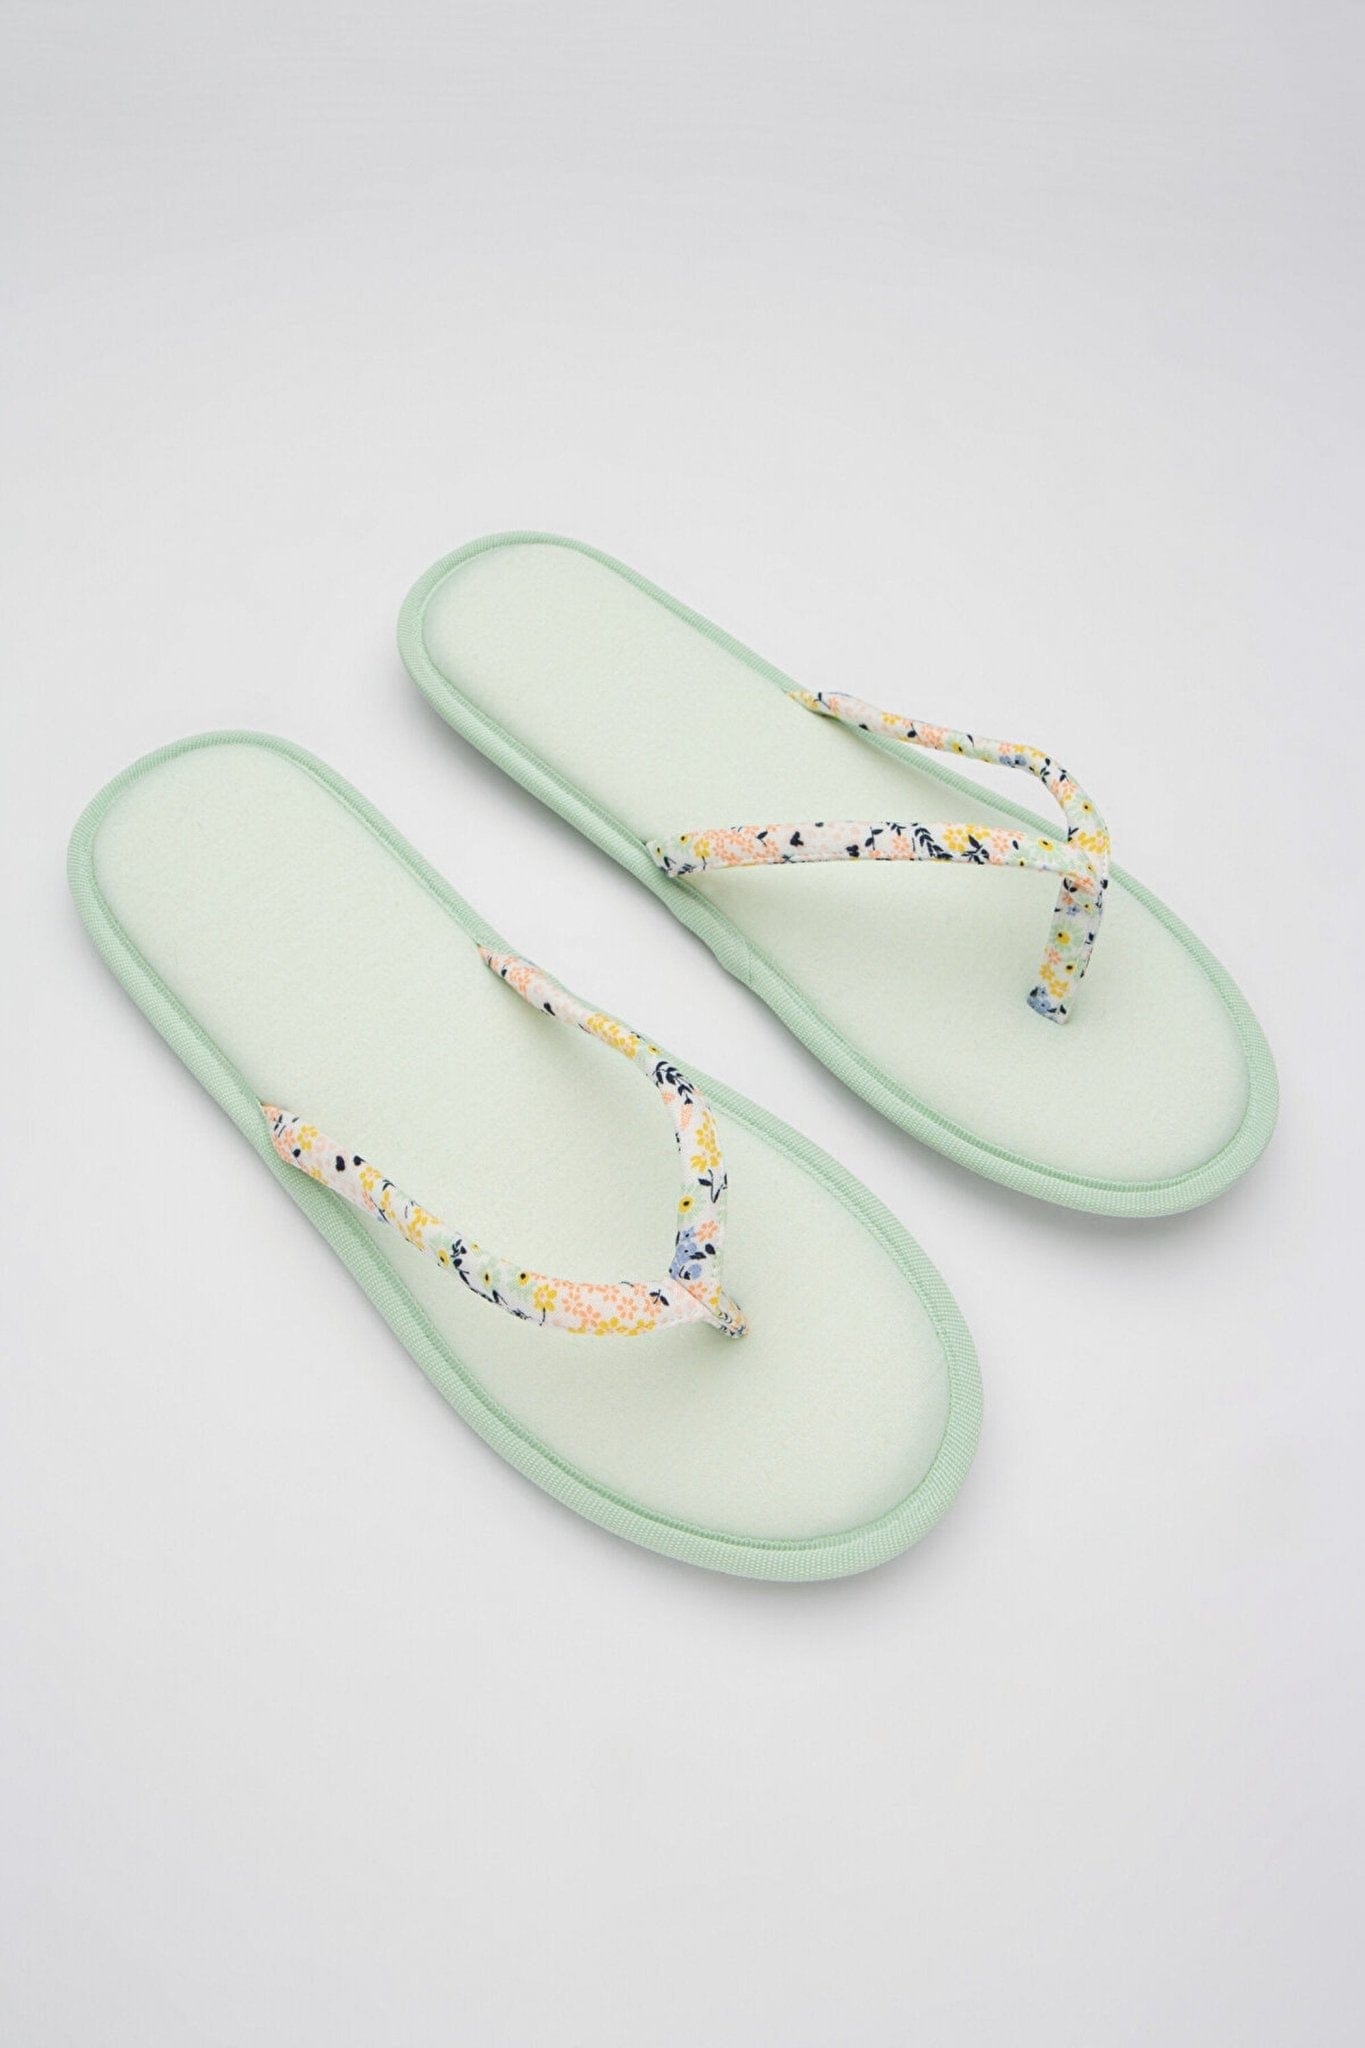 Mint Green Floral Patterned Spa Slippers 35-36 FLEXISB